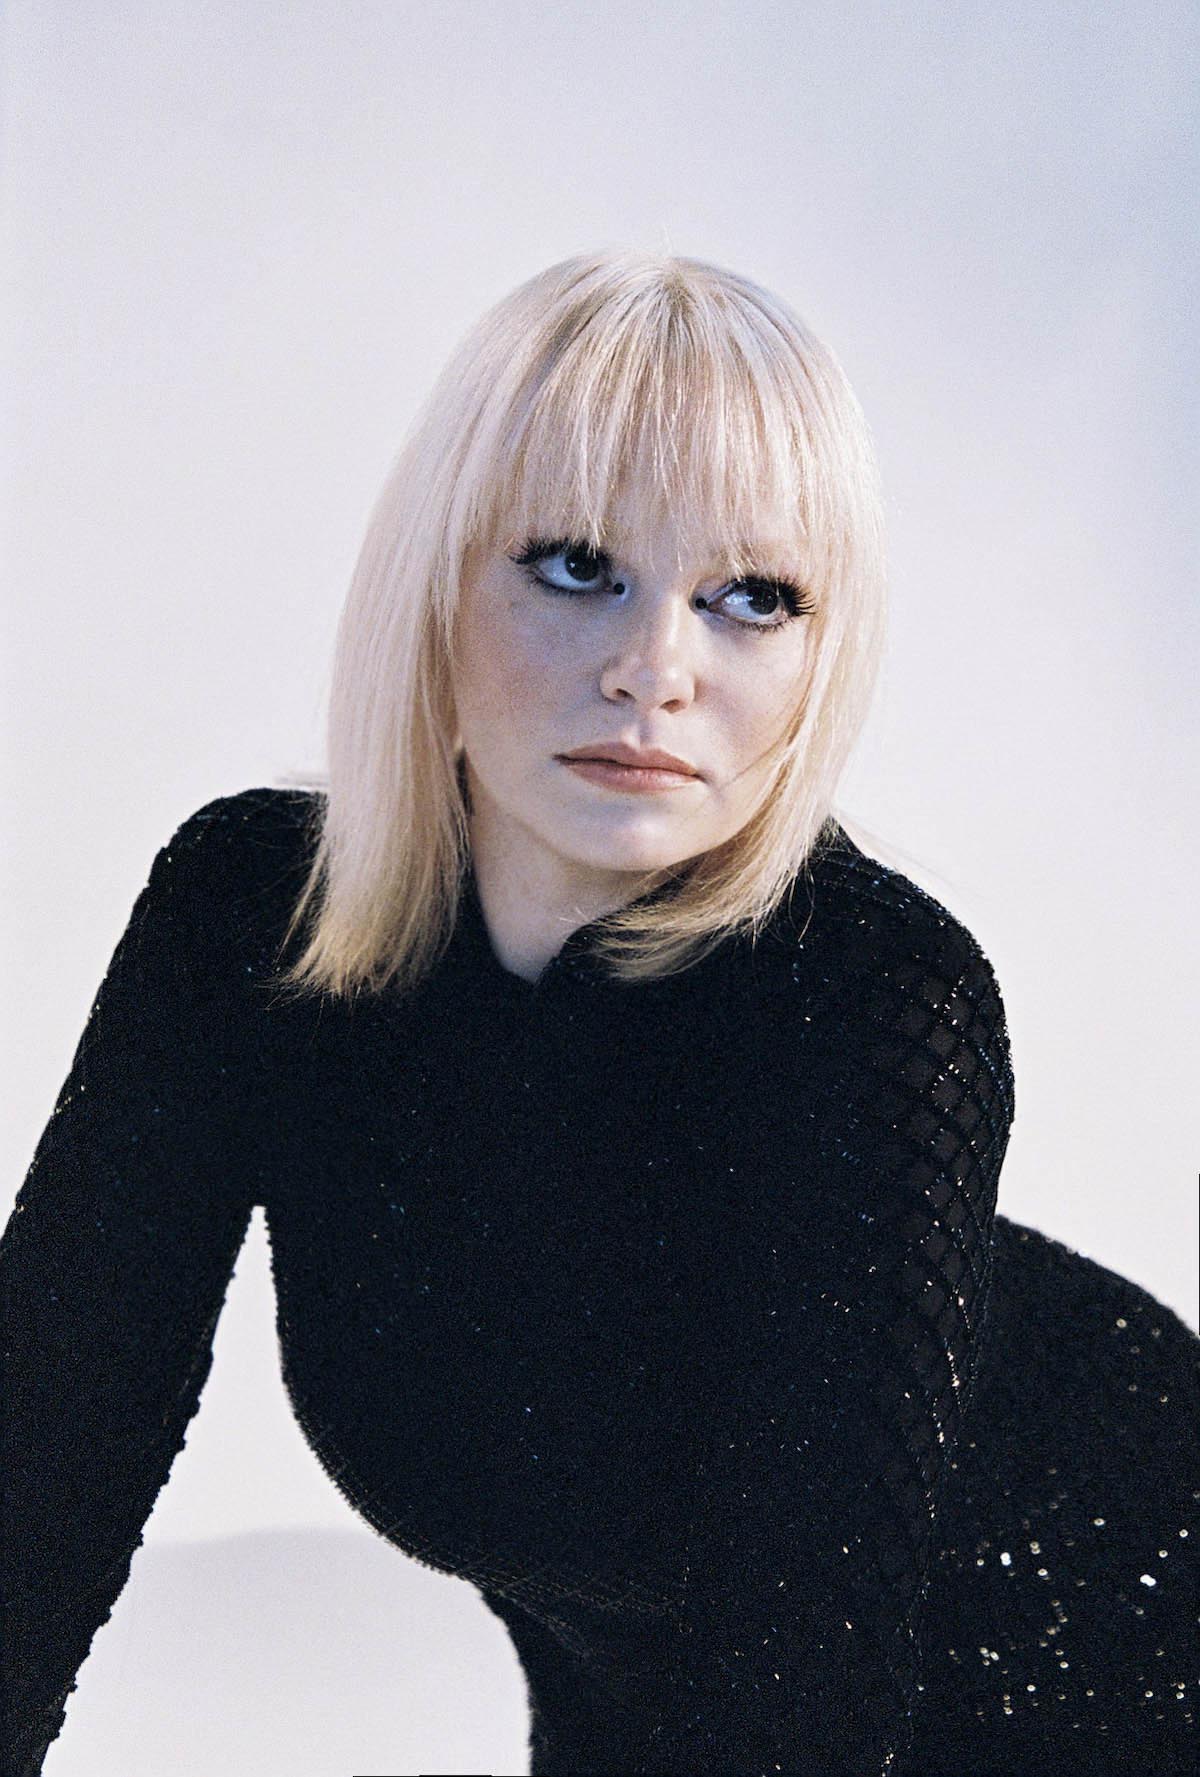 Female person with blond shoulder-length hair and bangs looks to the right side of the picture and up. She is wearing a black sparkly skin-tight dress with long sleeves.